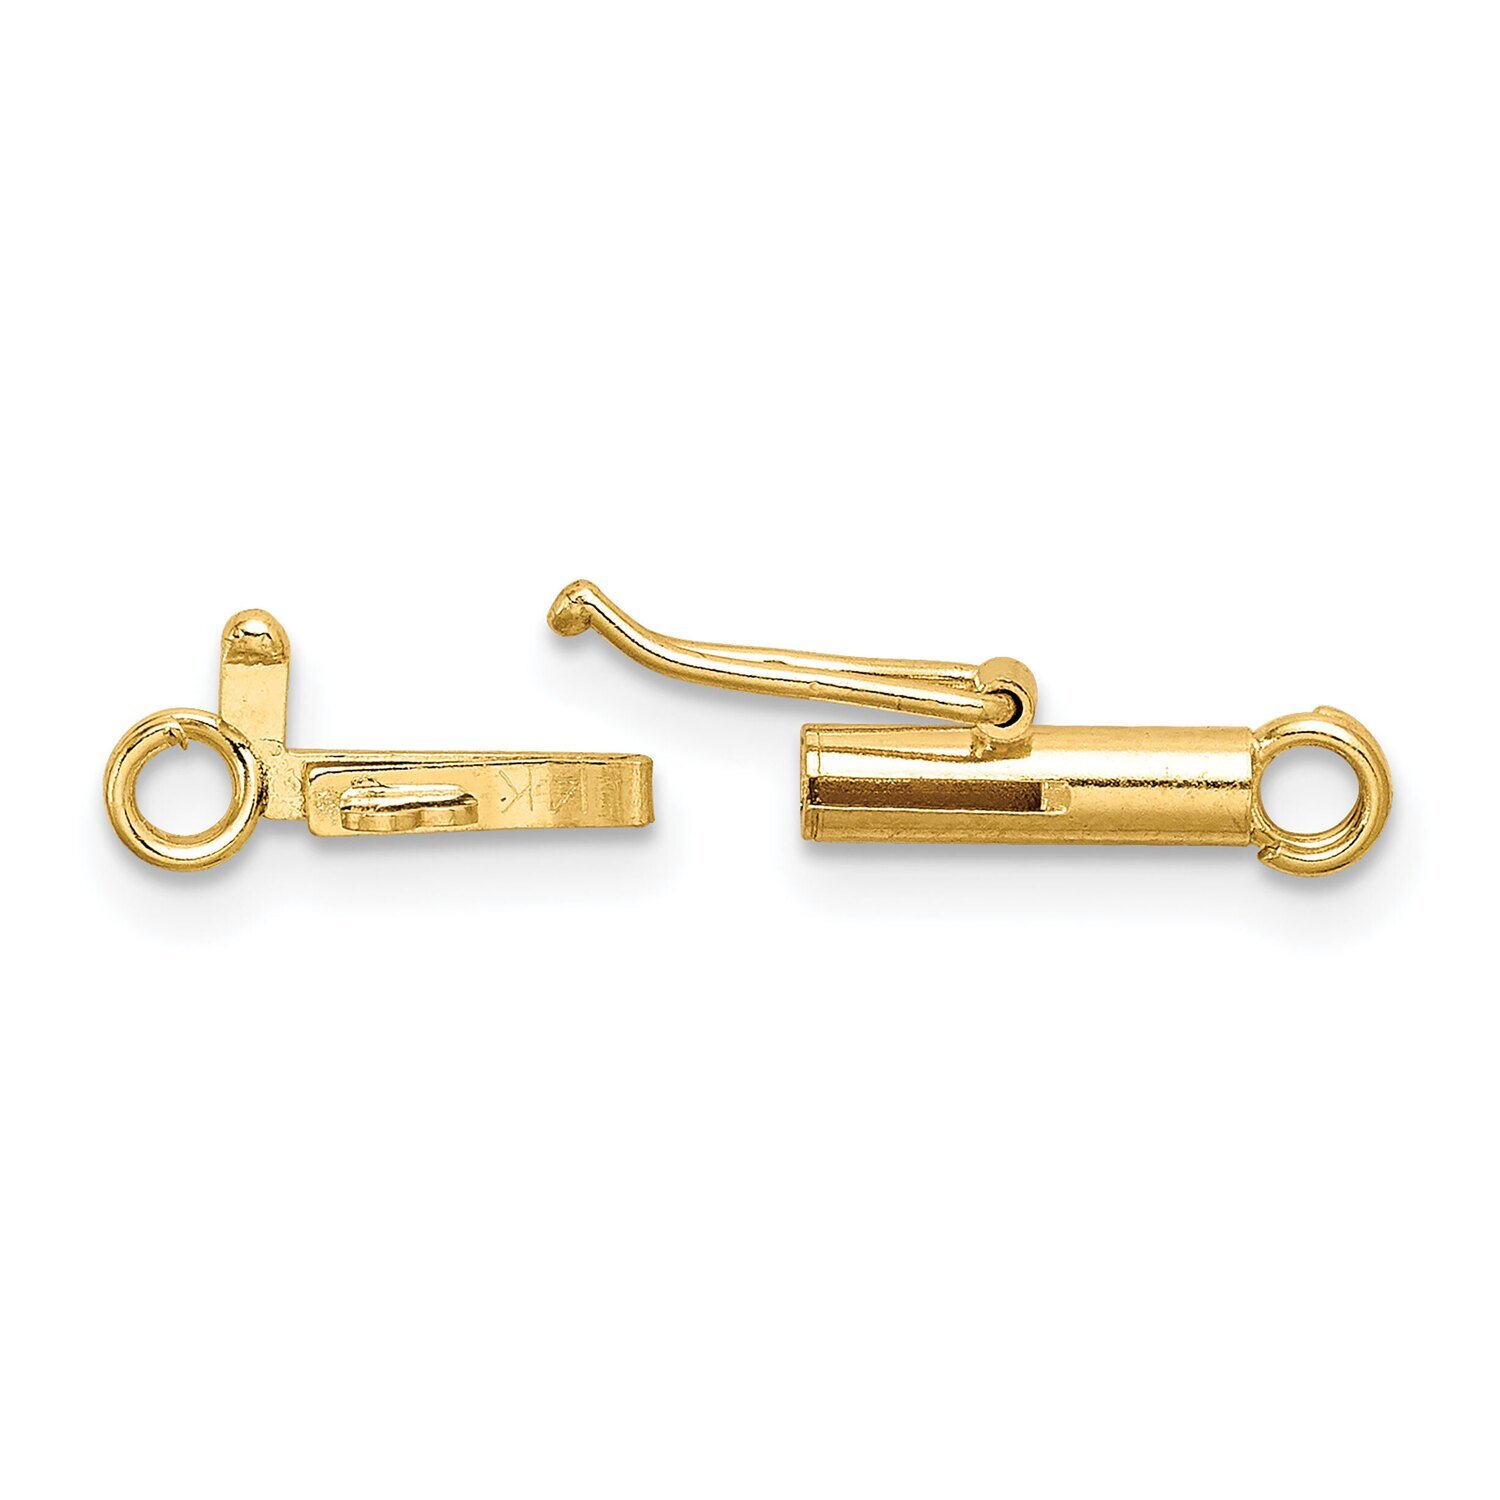 Spring Ring End Barrel Clasp 14k Yellow Gold YG1806